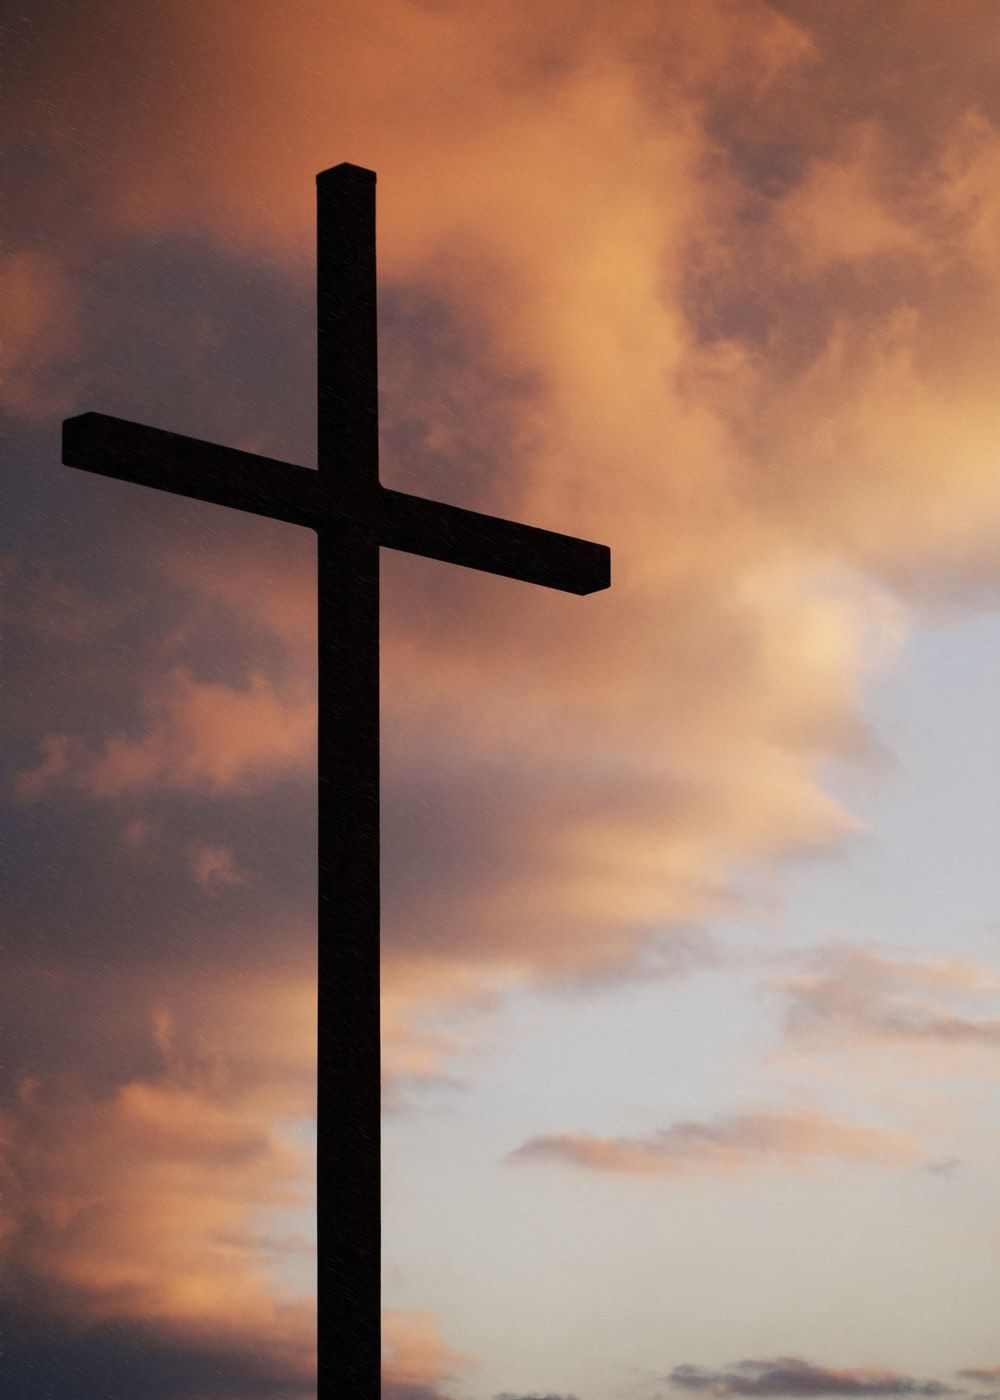 Bible Cross Picture. Download Free Image